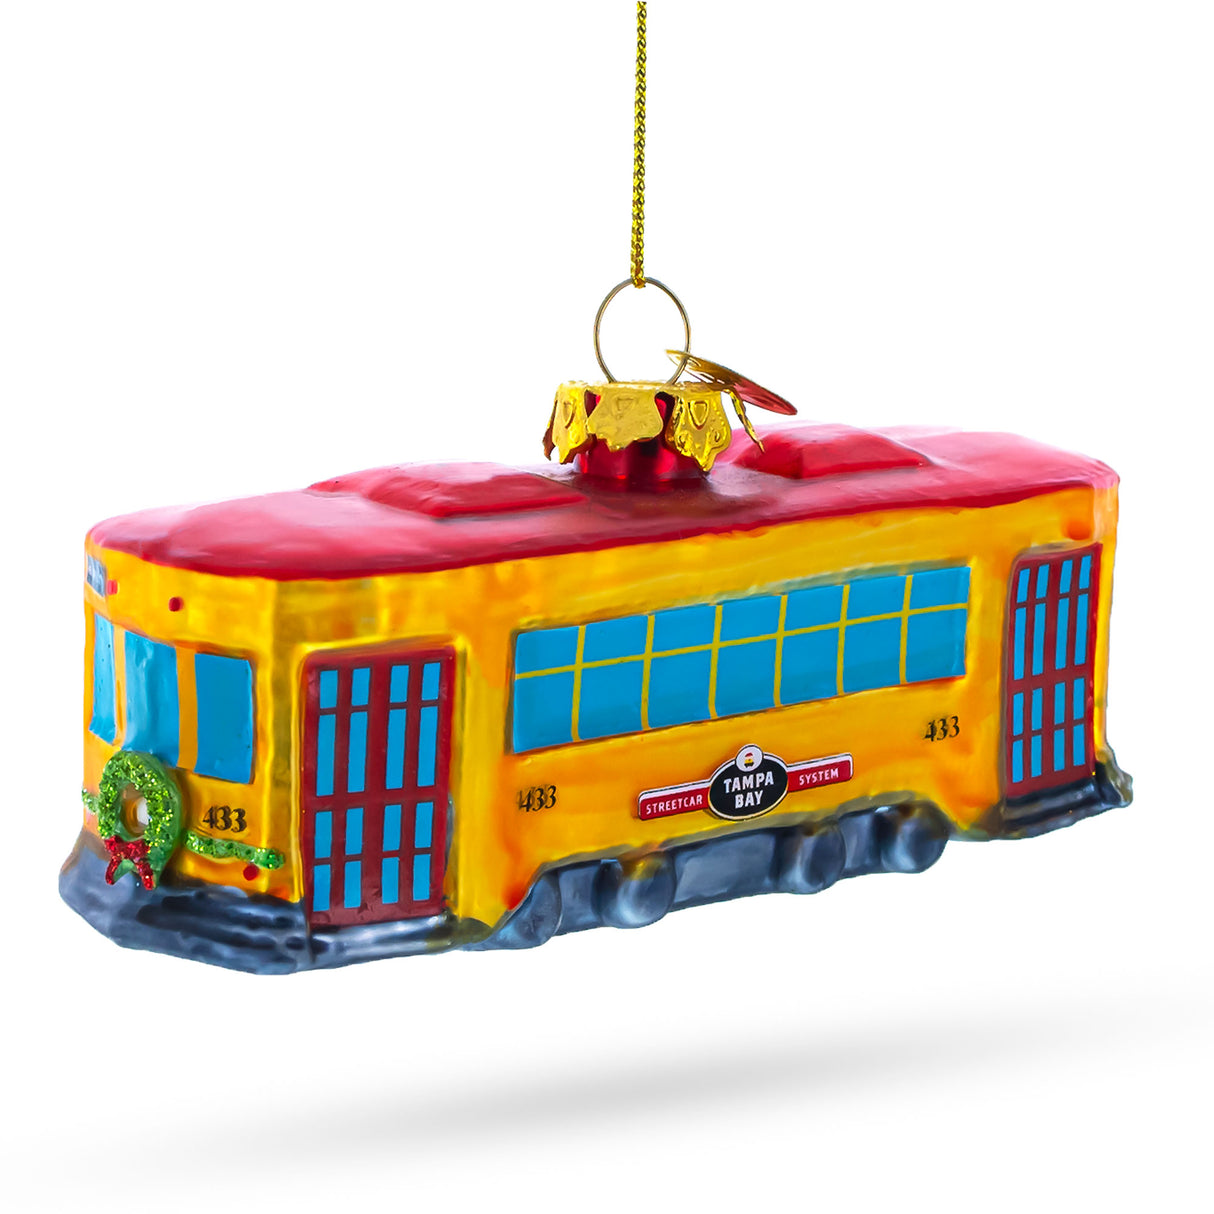 Glass Vintage-Inspired Streetcar Blown Glass Christmas Ornament in Multi color